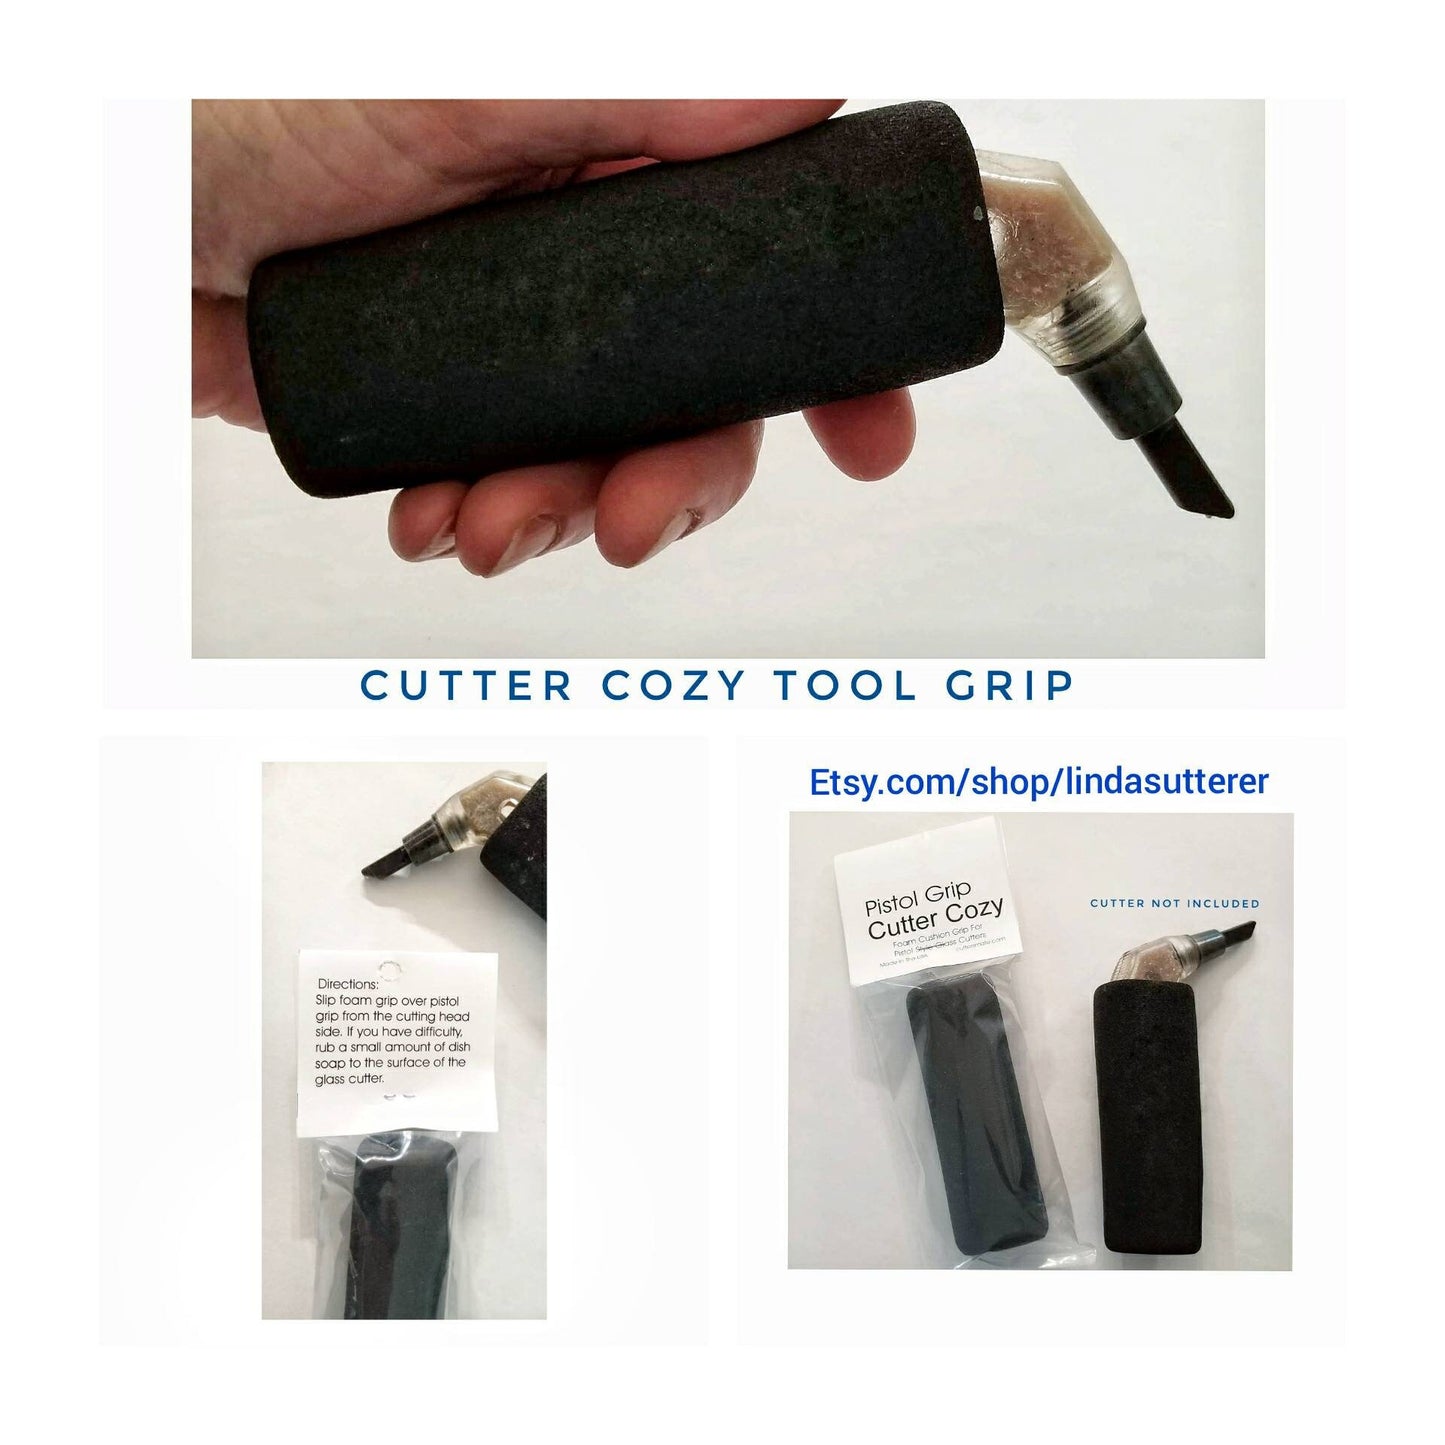 Cutter Cozy for Palm Grip Cutting Tool. Ergonomic & Comfortable. Stained glass cutting tool accessory. Lessens hand stress.